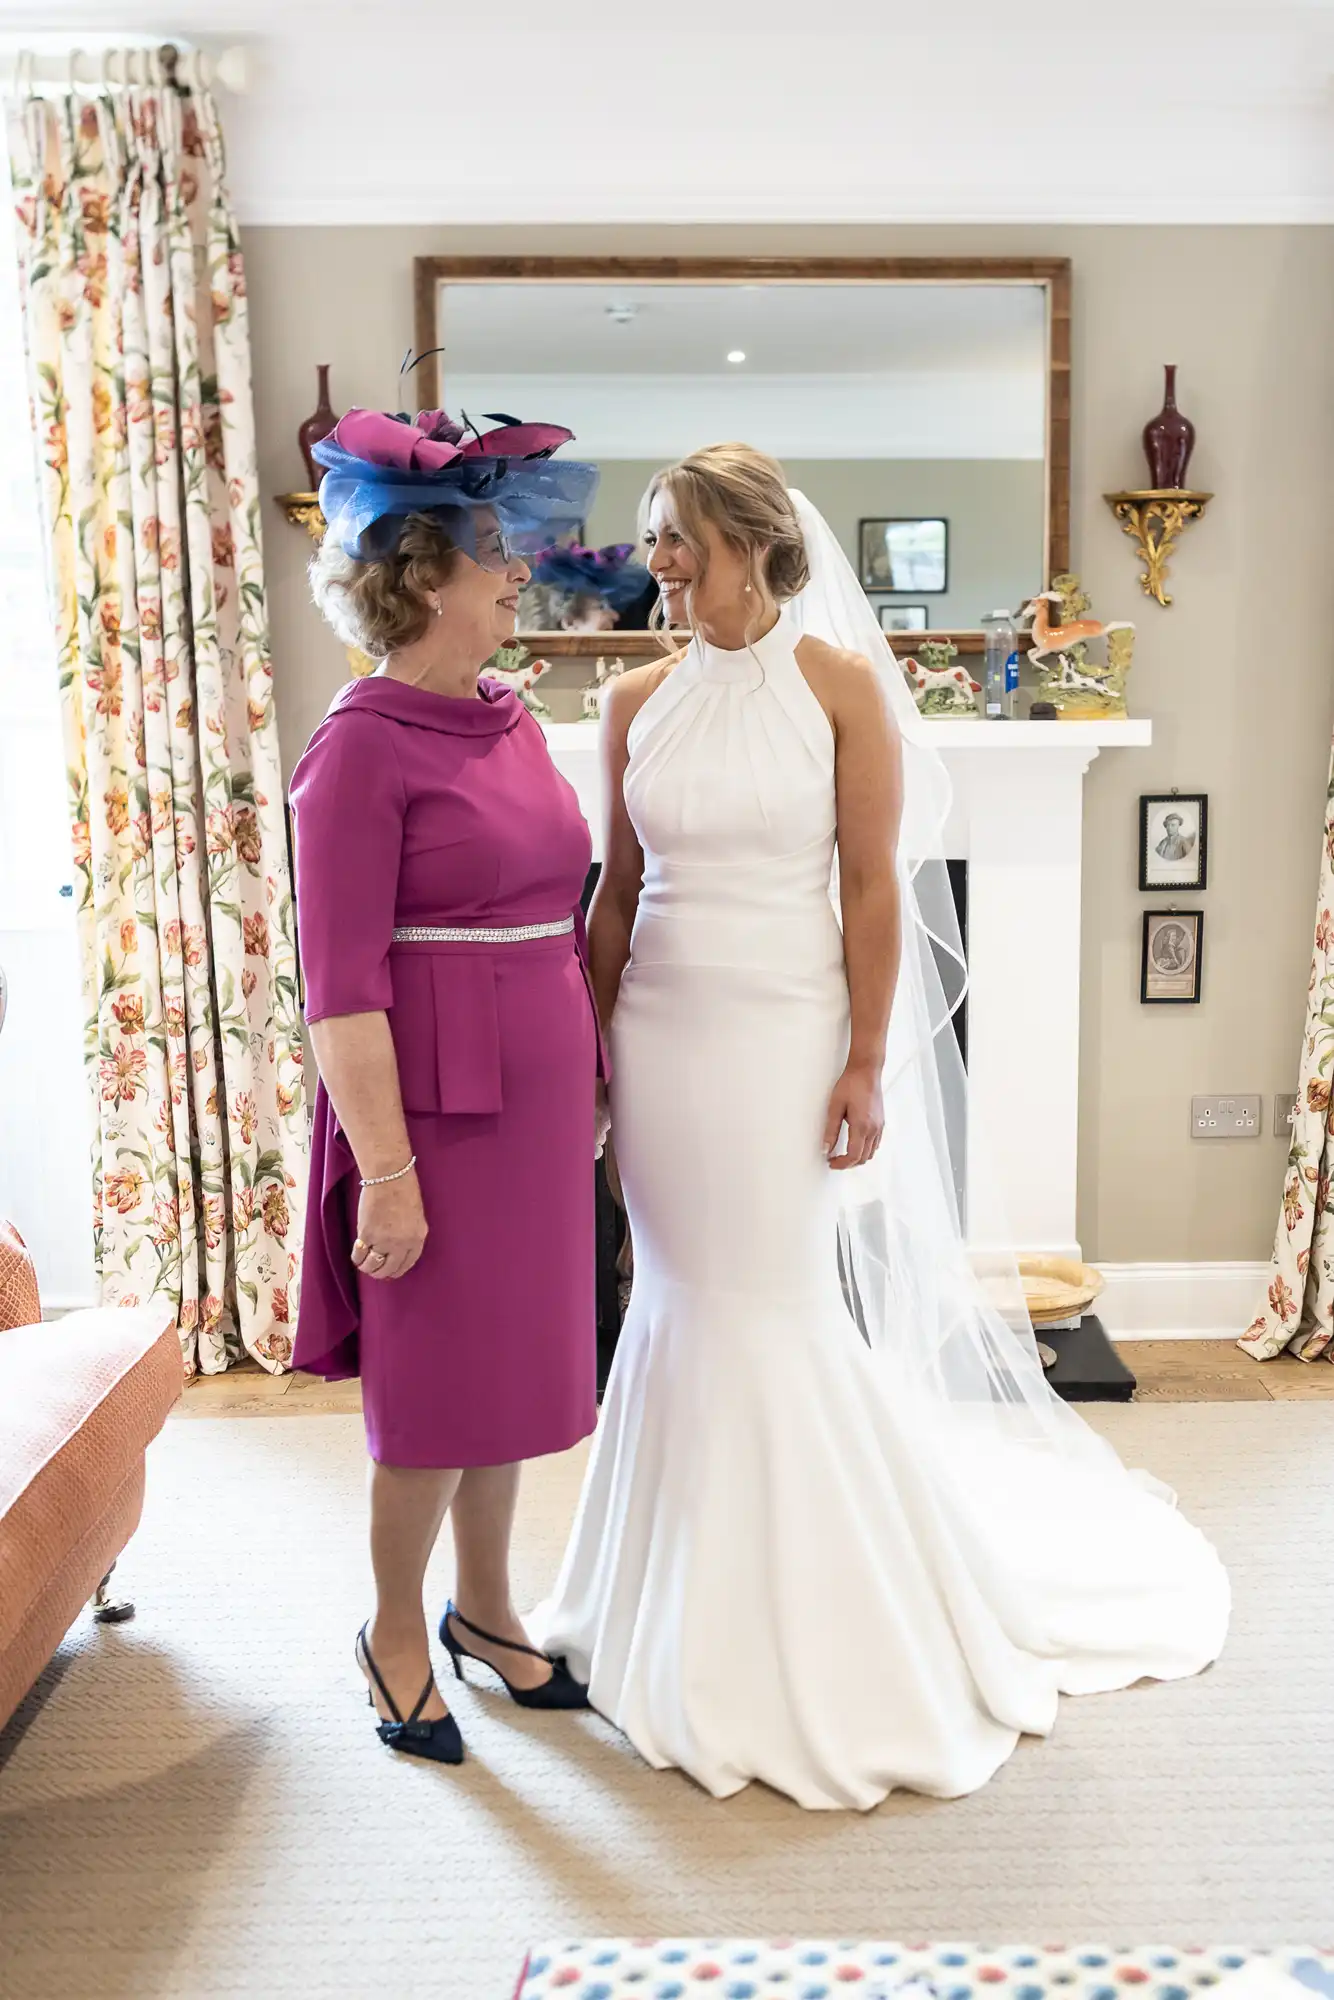 A bride in a white gown smiling at a woman in a magenta dress and blue hat in a well-lit room, both standing near a fireplace.